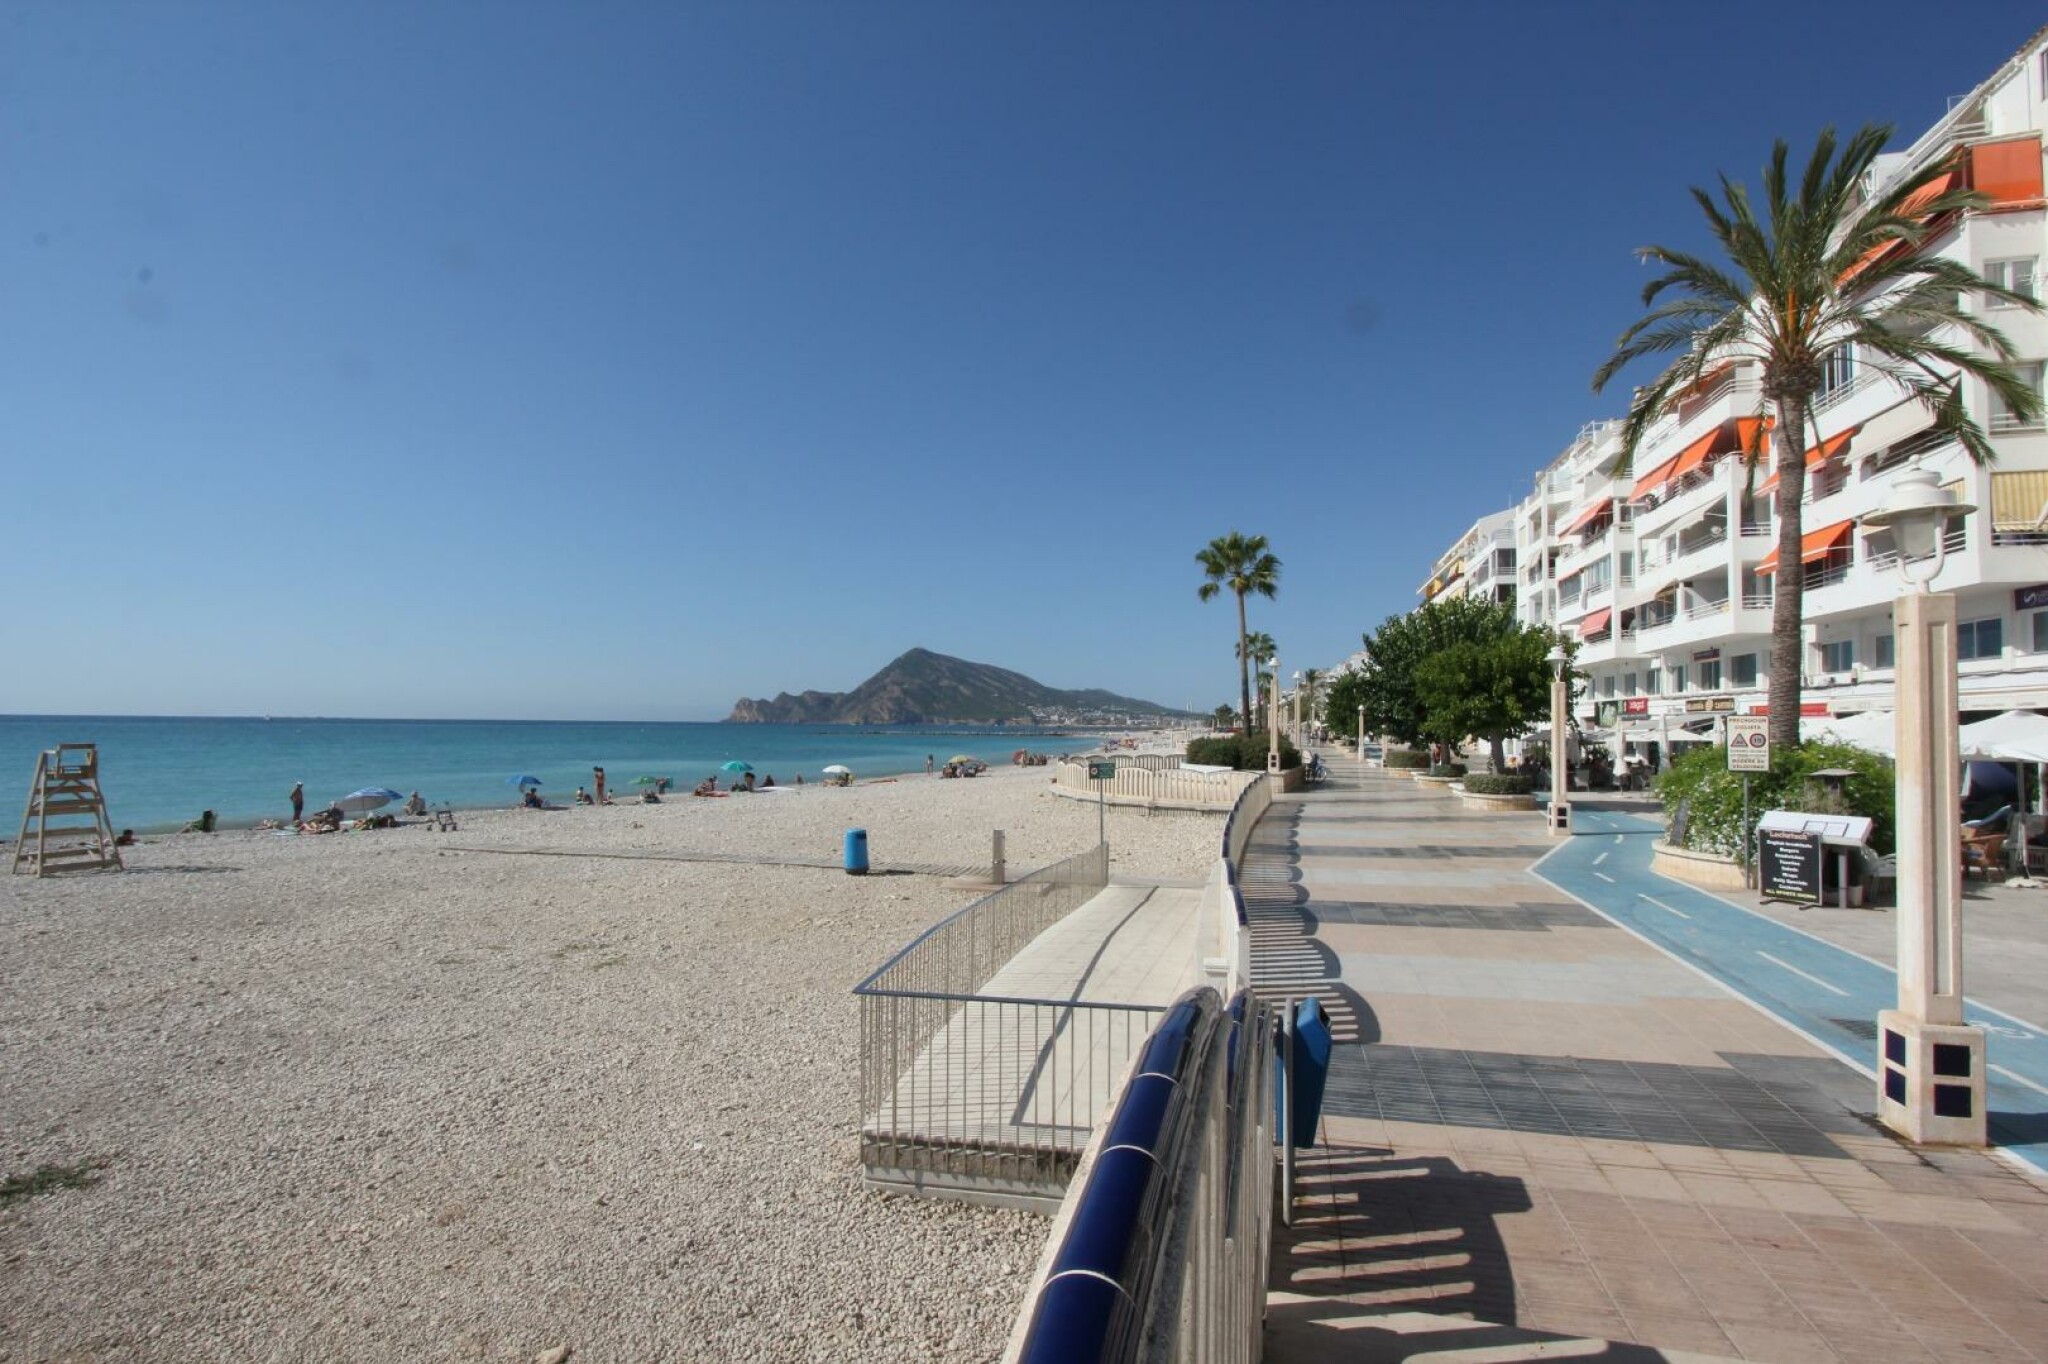 Reasons to buy a house on the Costa Blanca (and II)